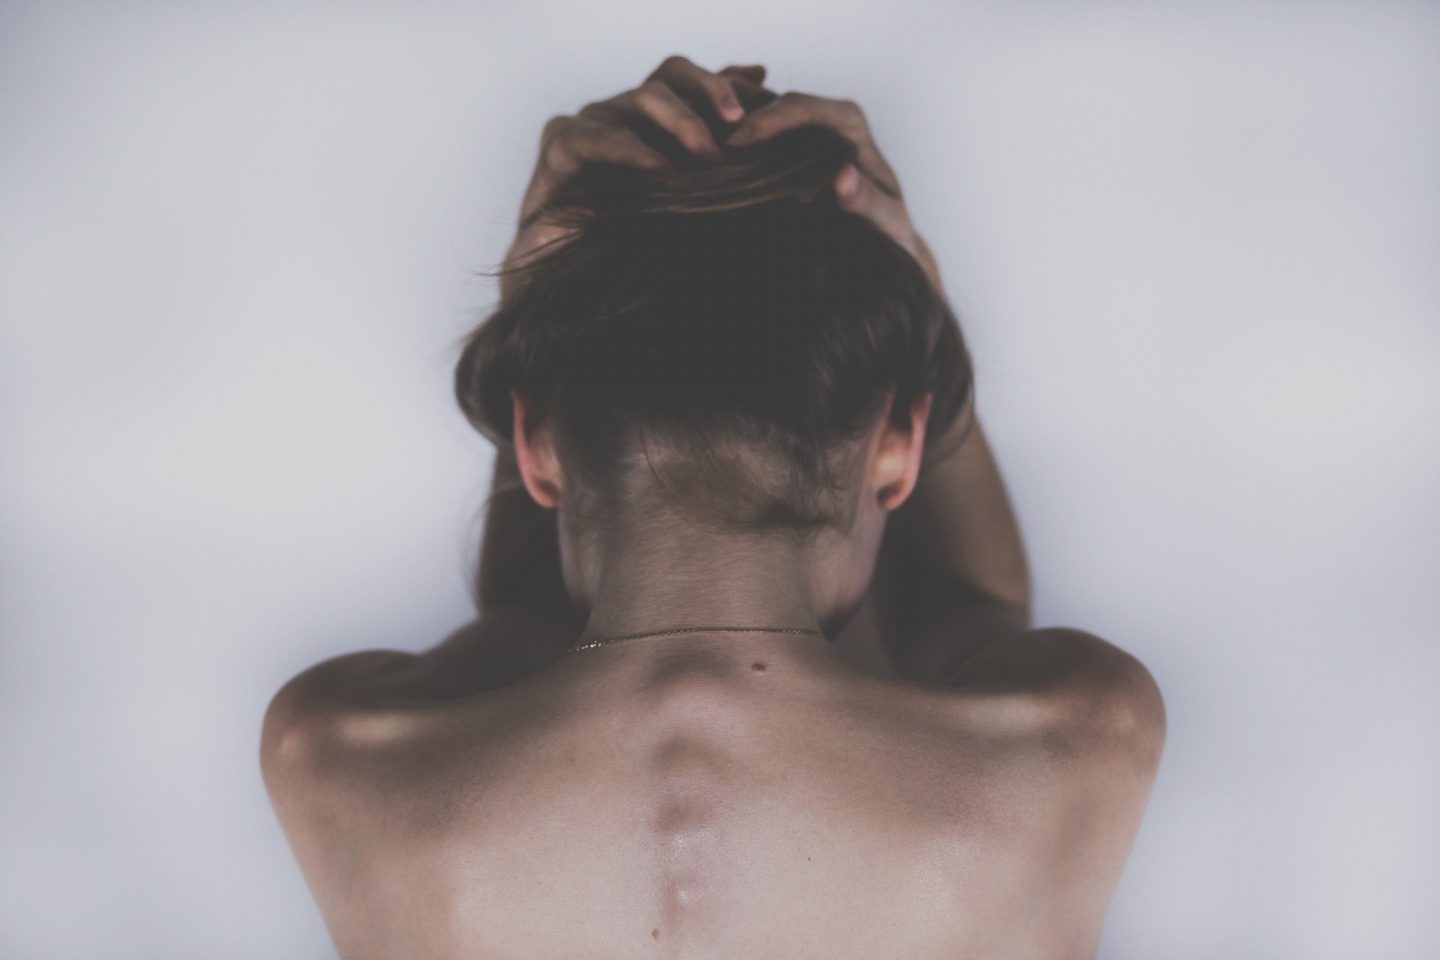 A darkly coloured image showing the upper bare back and shoulders of a woman. Her hands are on her head and she faces away from the camera, suggesting she's suffering, perhaps with mental health, illness or chronic pain.